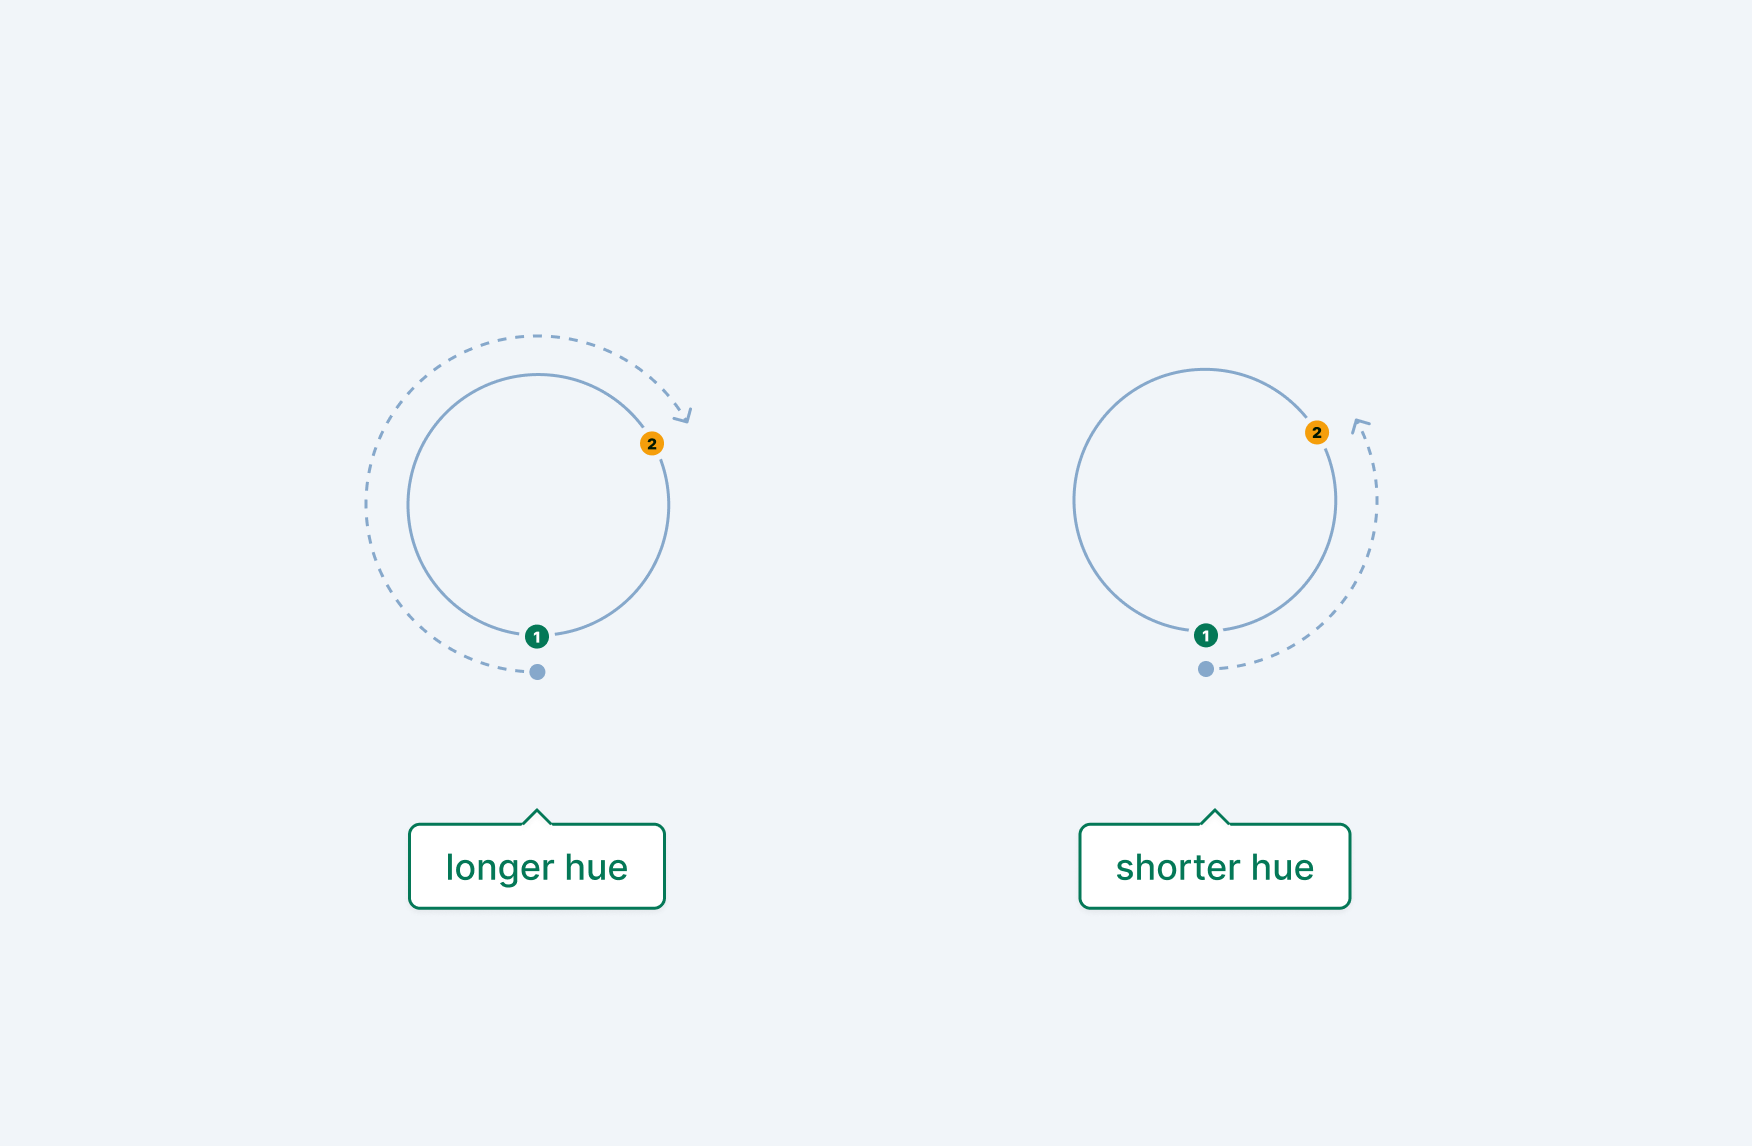 Examples of longer and shorter hue calculations